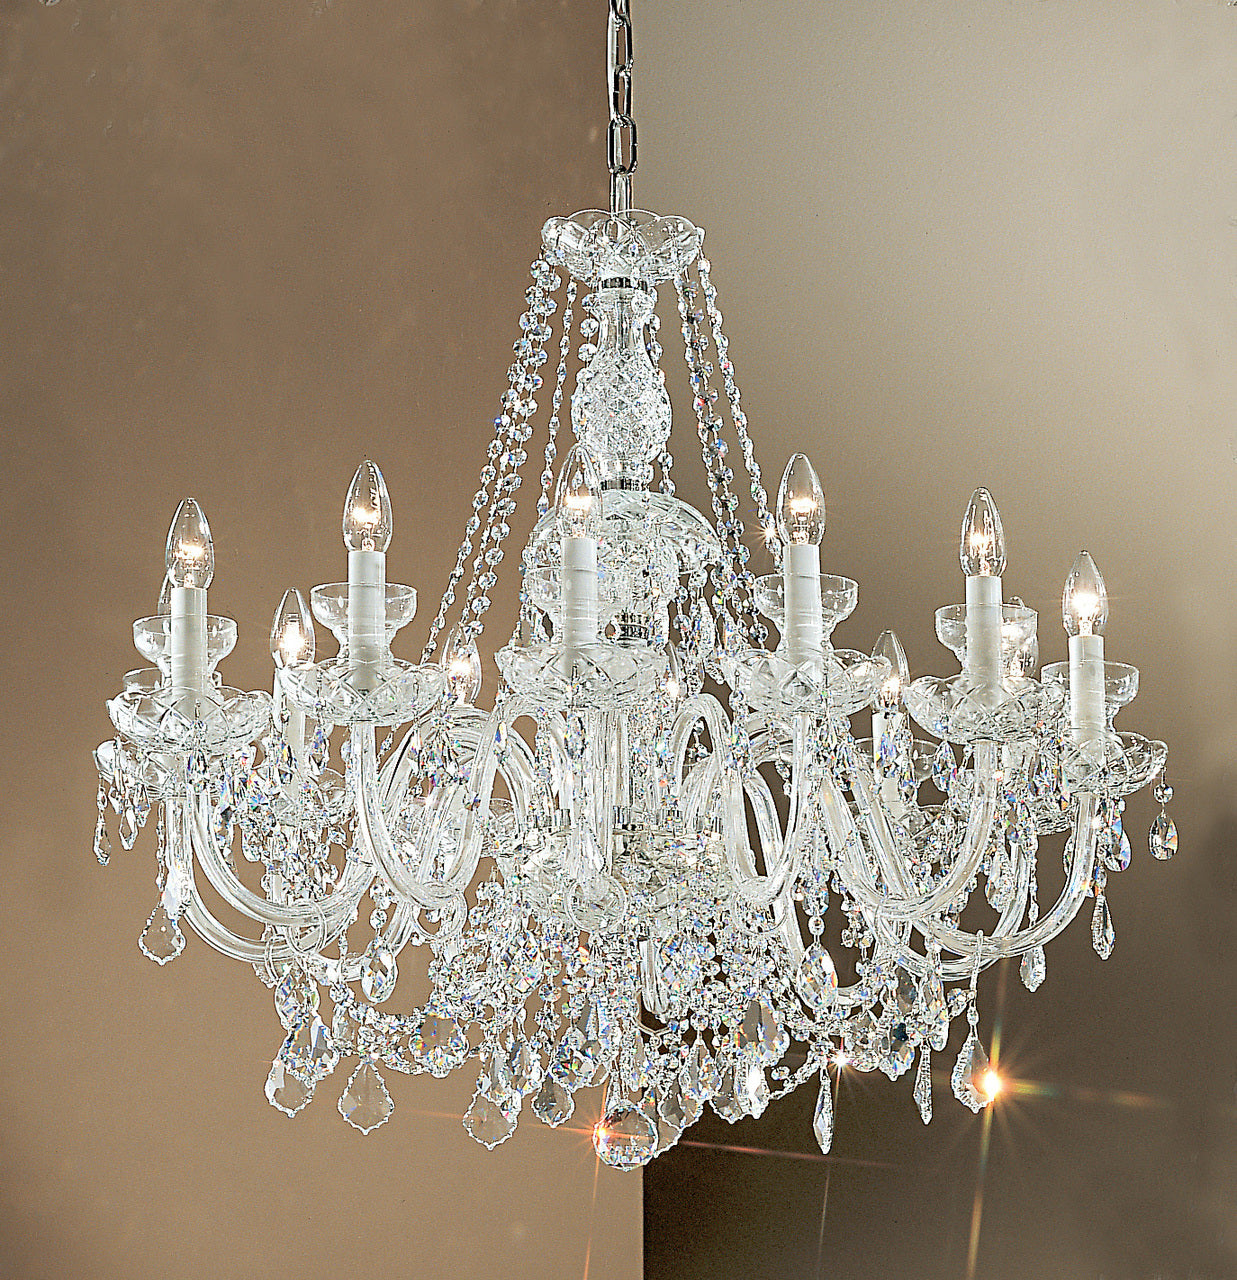 Classic Lighting 8274 G C Bohemia Crystal/Glass Chandelier in 24k Gold (Imported from Italy)